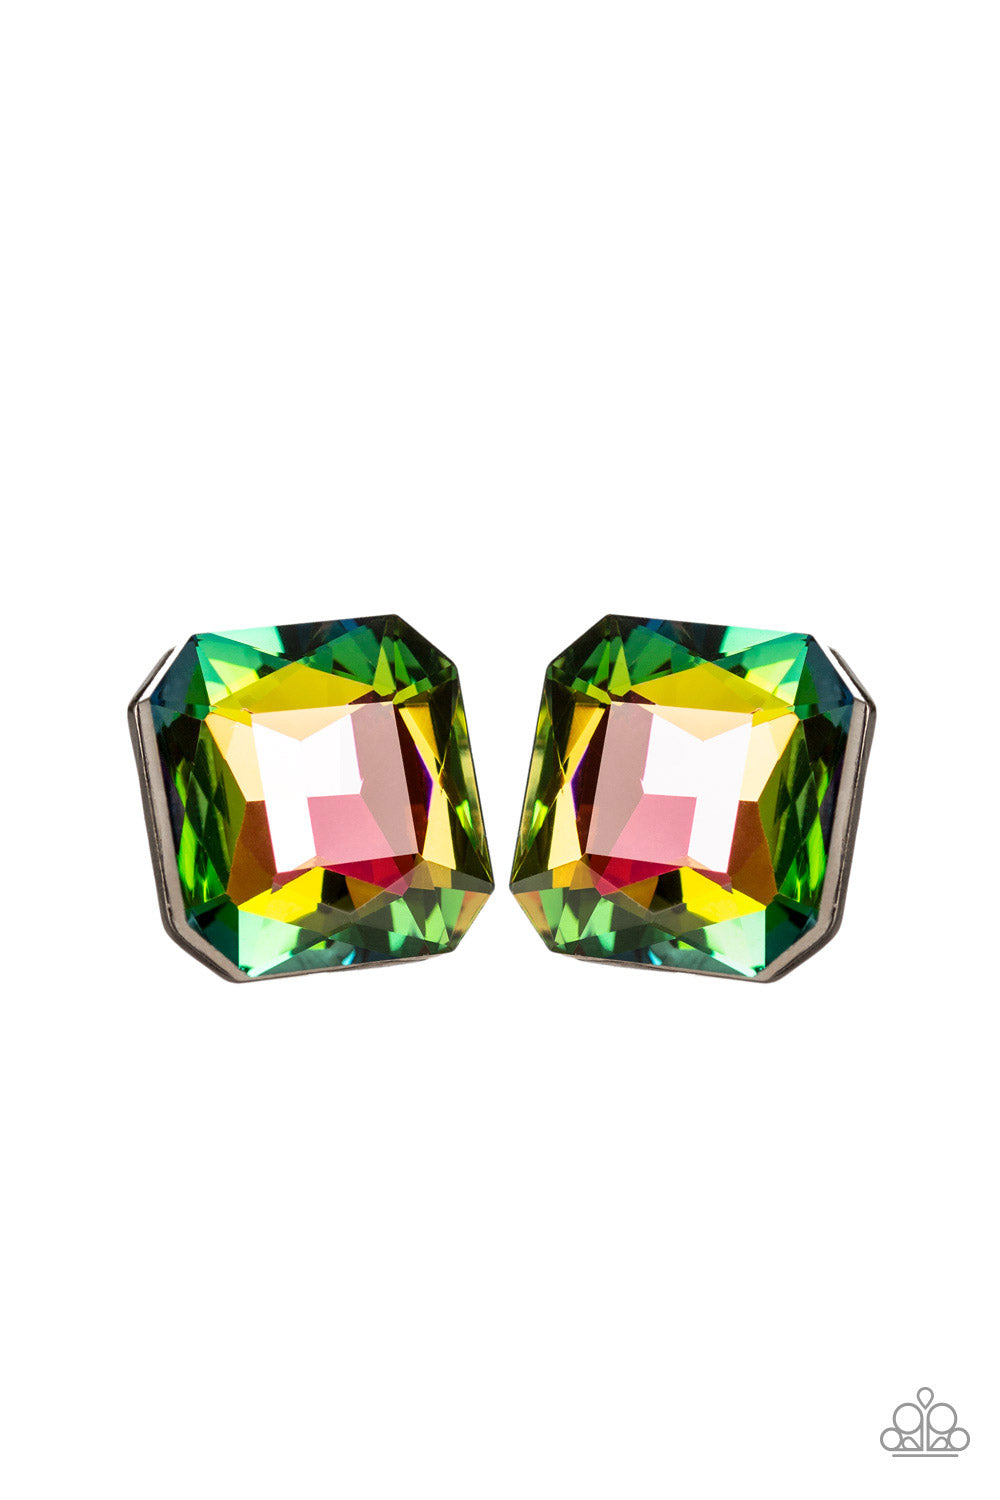 SHOW GLOW - LARGE OIL SPILL SQUARE RHINESTONE SOLITAIRE POST EARRINGS